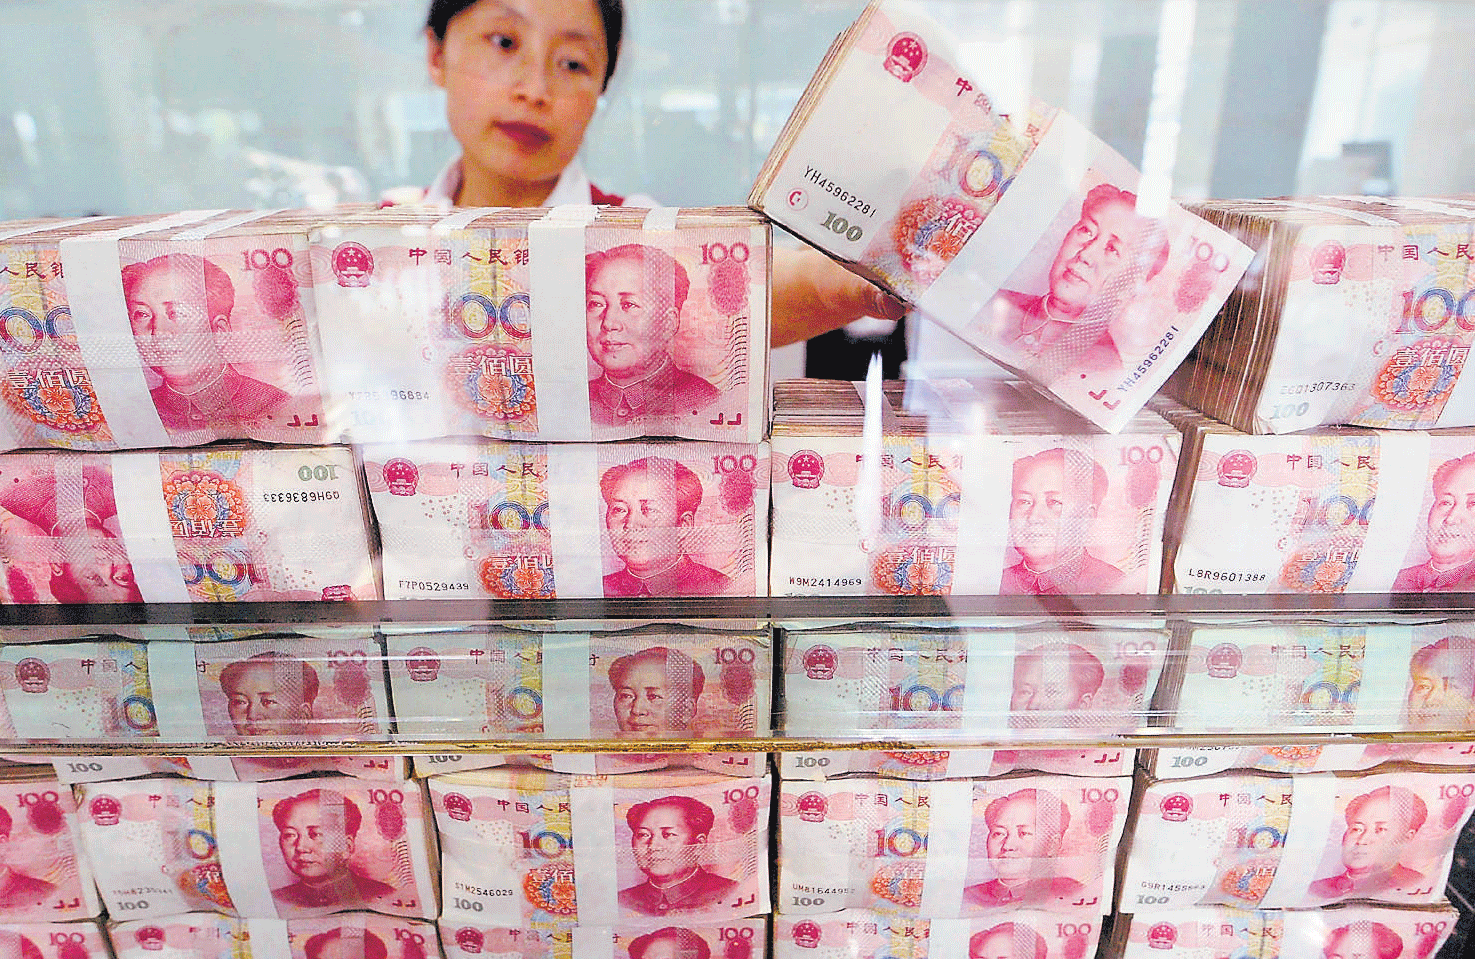 BIG WORRY: An employee counts money on the last workday of the week at a bank in Taiyuan, Shanxi province. REUTERS